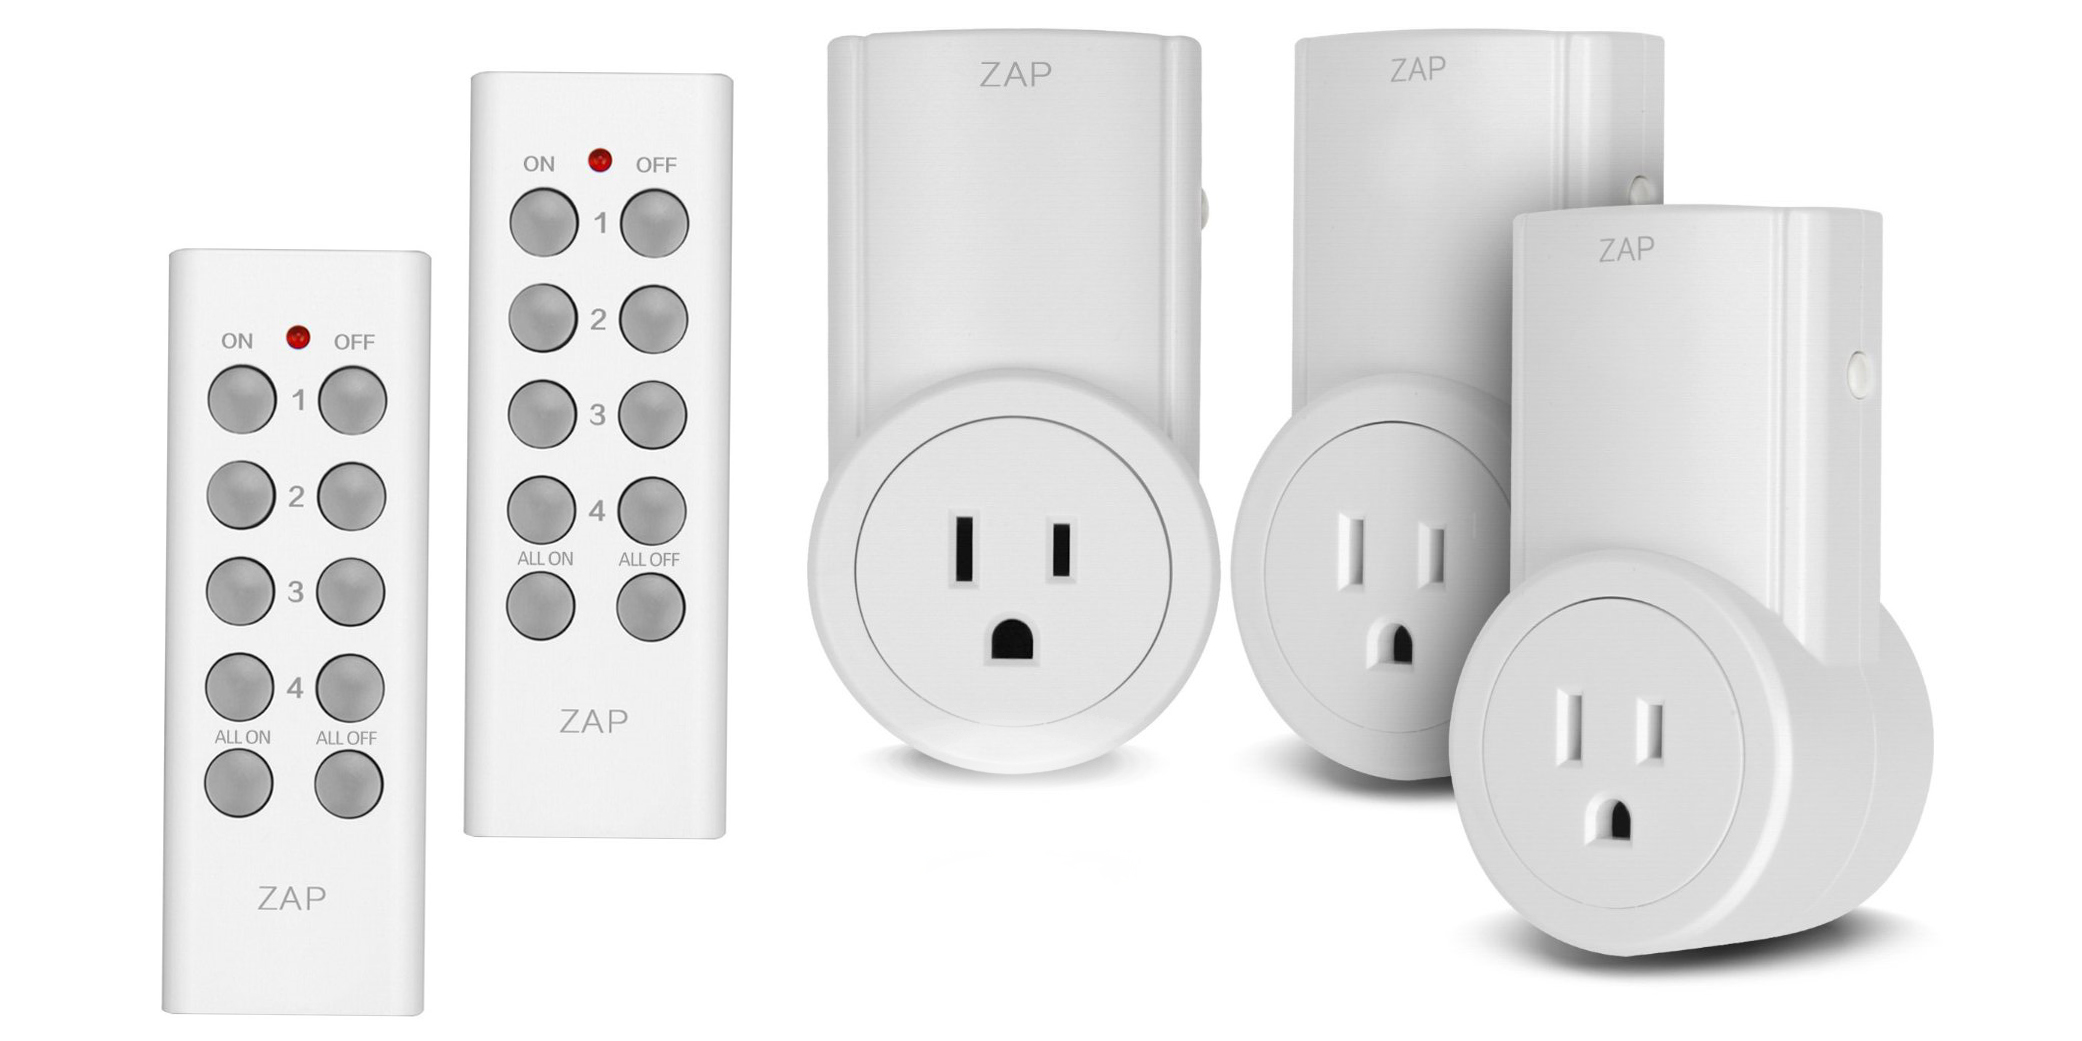 Green Deals: Etekcity 3-pack of Remote Outlet Switches $17 (Reg. $25),  12-pack AAA Rechargeable Batteries $10, more